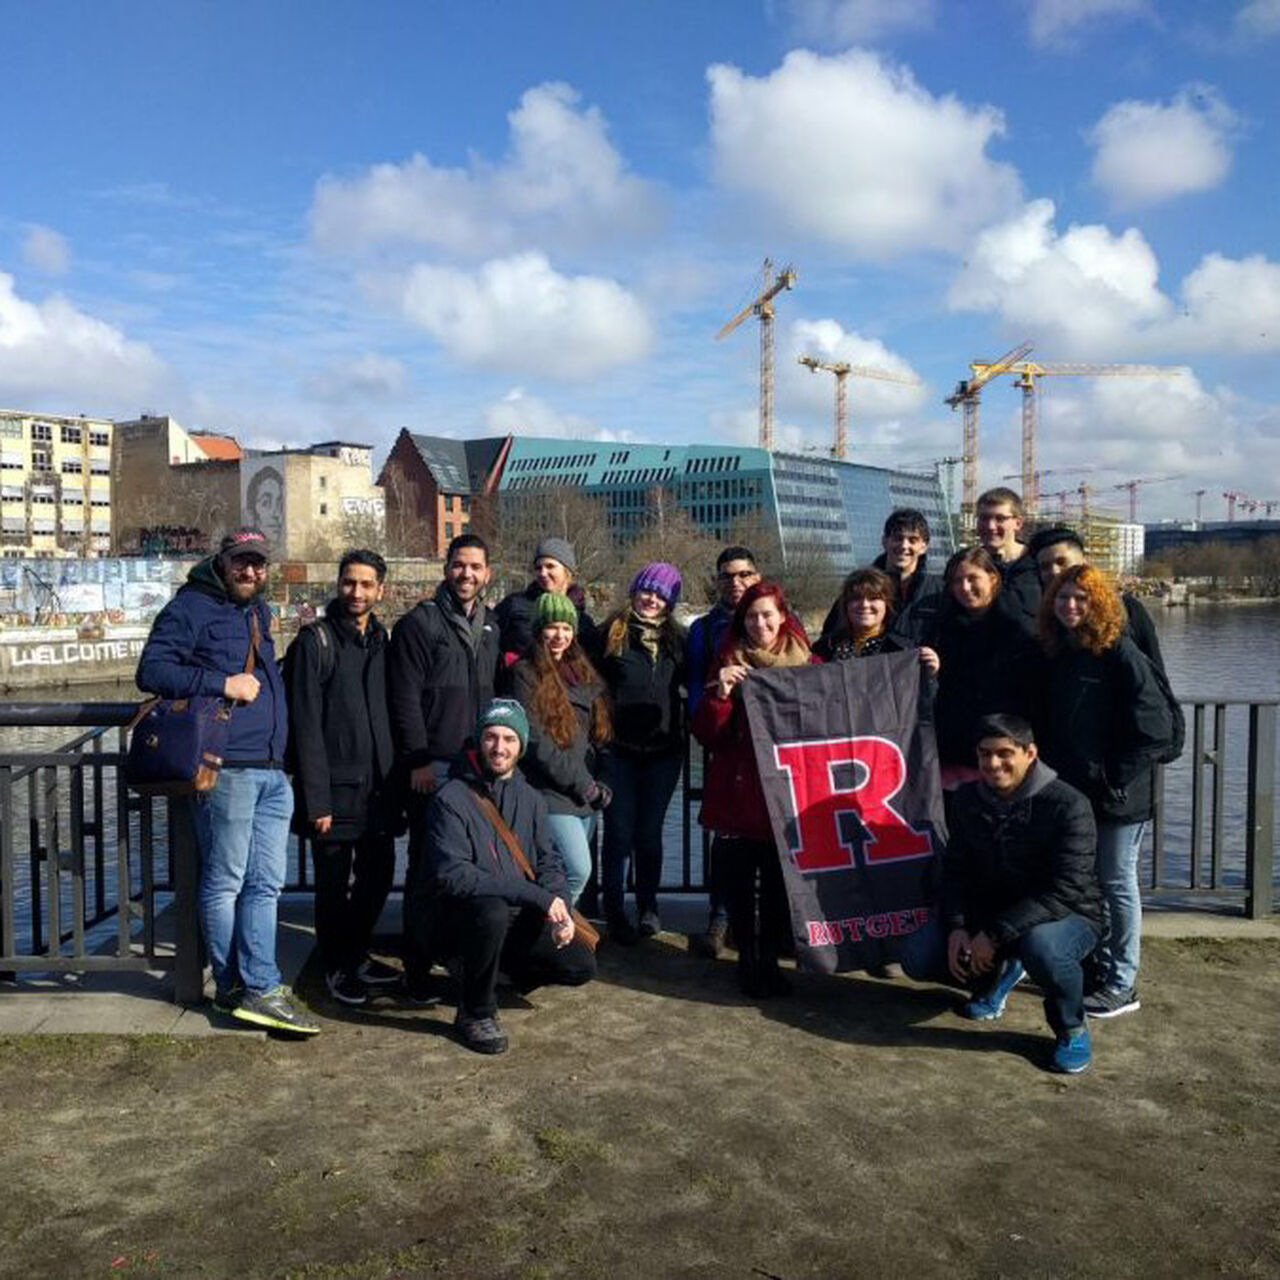 Students standing in a group outside holding a flag with a Rutgers R on it image number 0